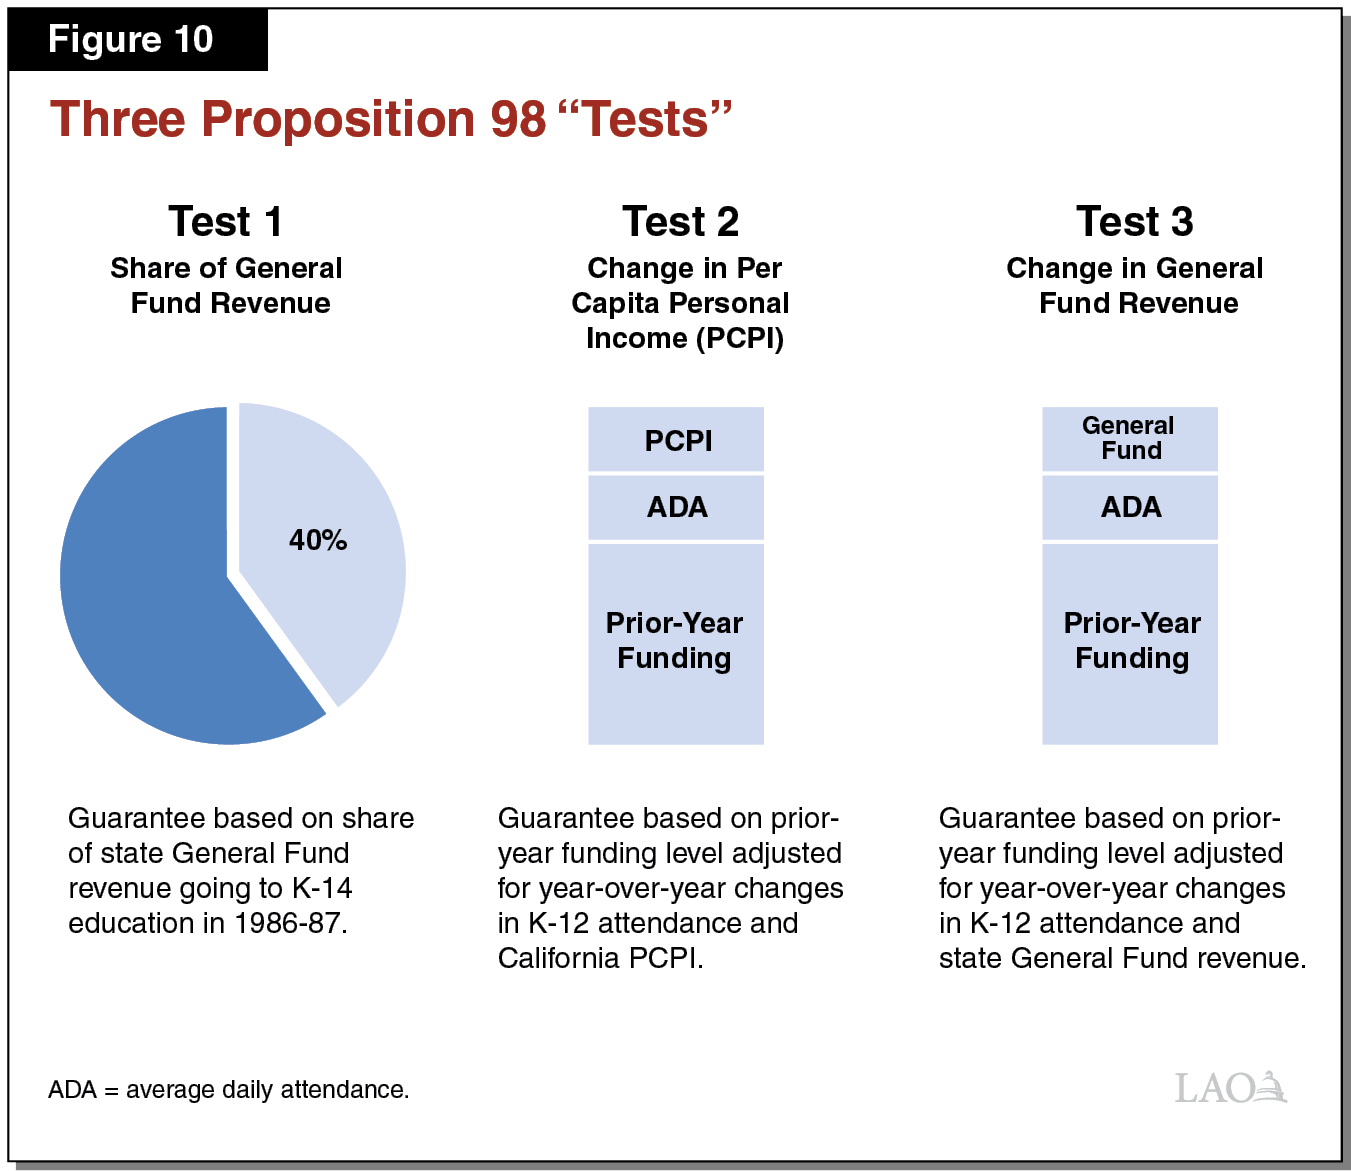 Figure 10 - Three Proposition 98 Tests